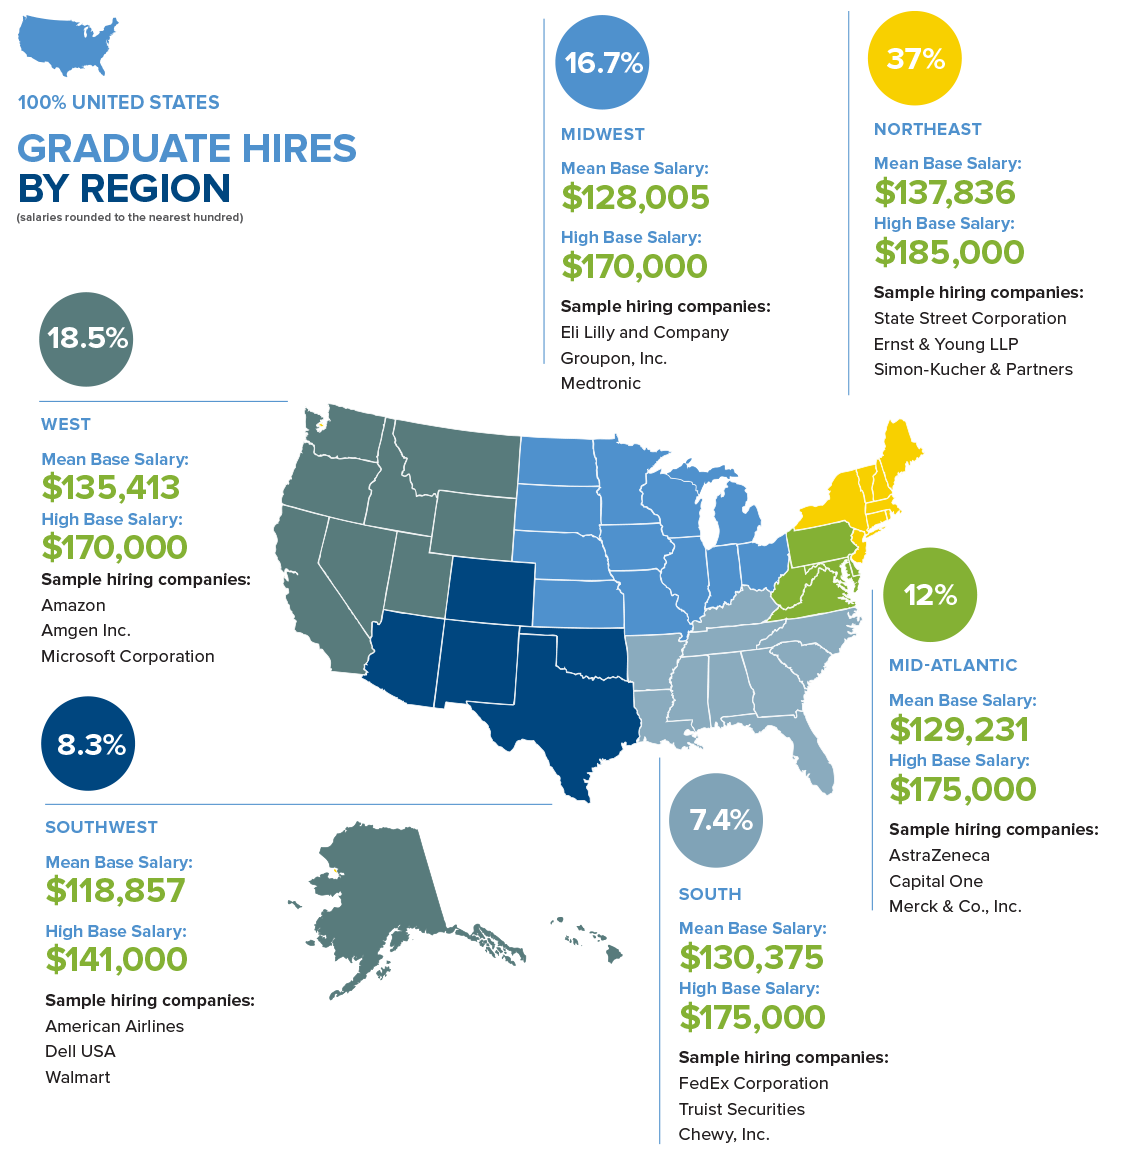 This map shows locations around the US where the Class of 2022 MBA graduates accepted employment offers. View the full map here: https://simon.rochester.edu/sites/default/files/2023-01/ADM20-22-07_MBA_Career_Highlights_FY23_web.pdf